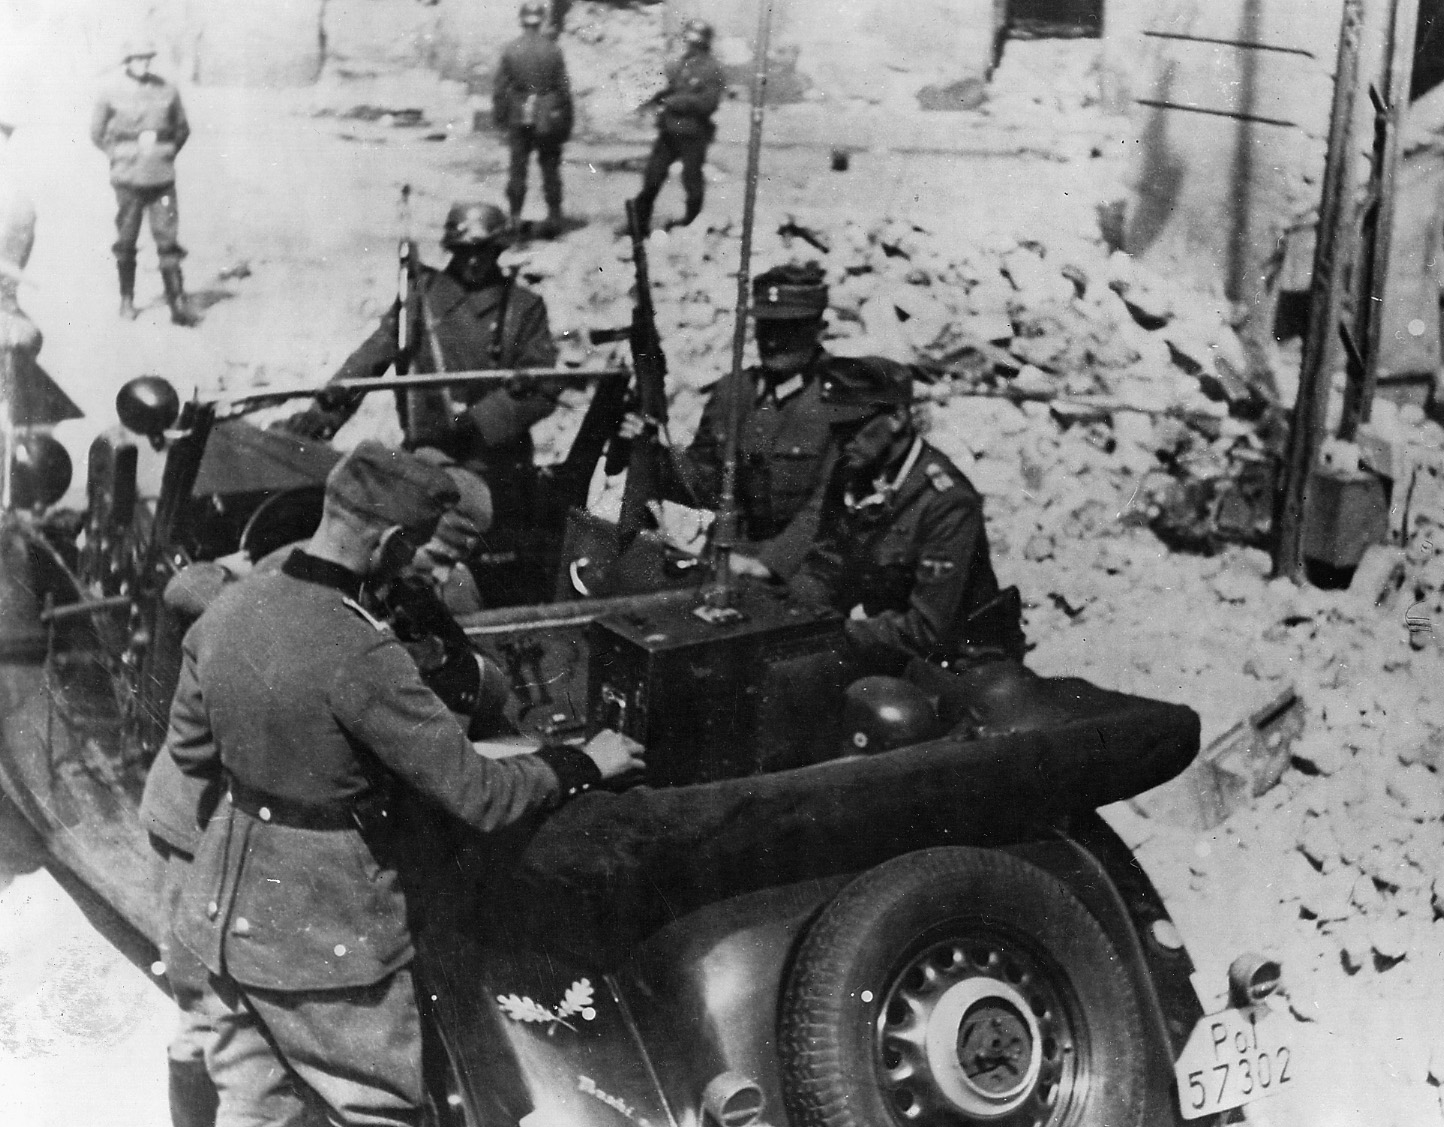 SS officers gather to coordinate an attack on the ghetto.